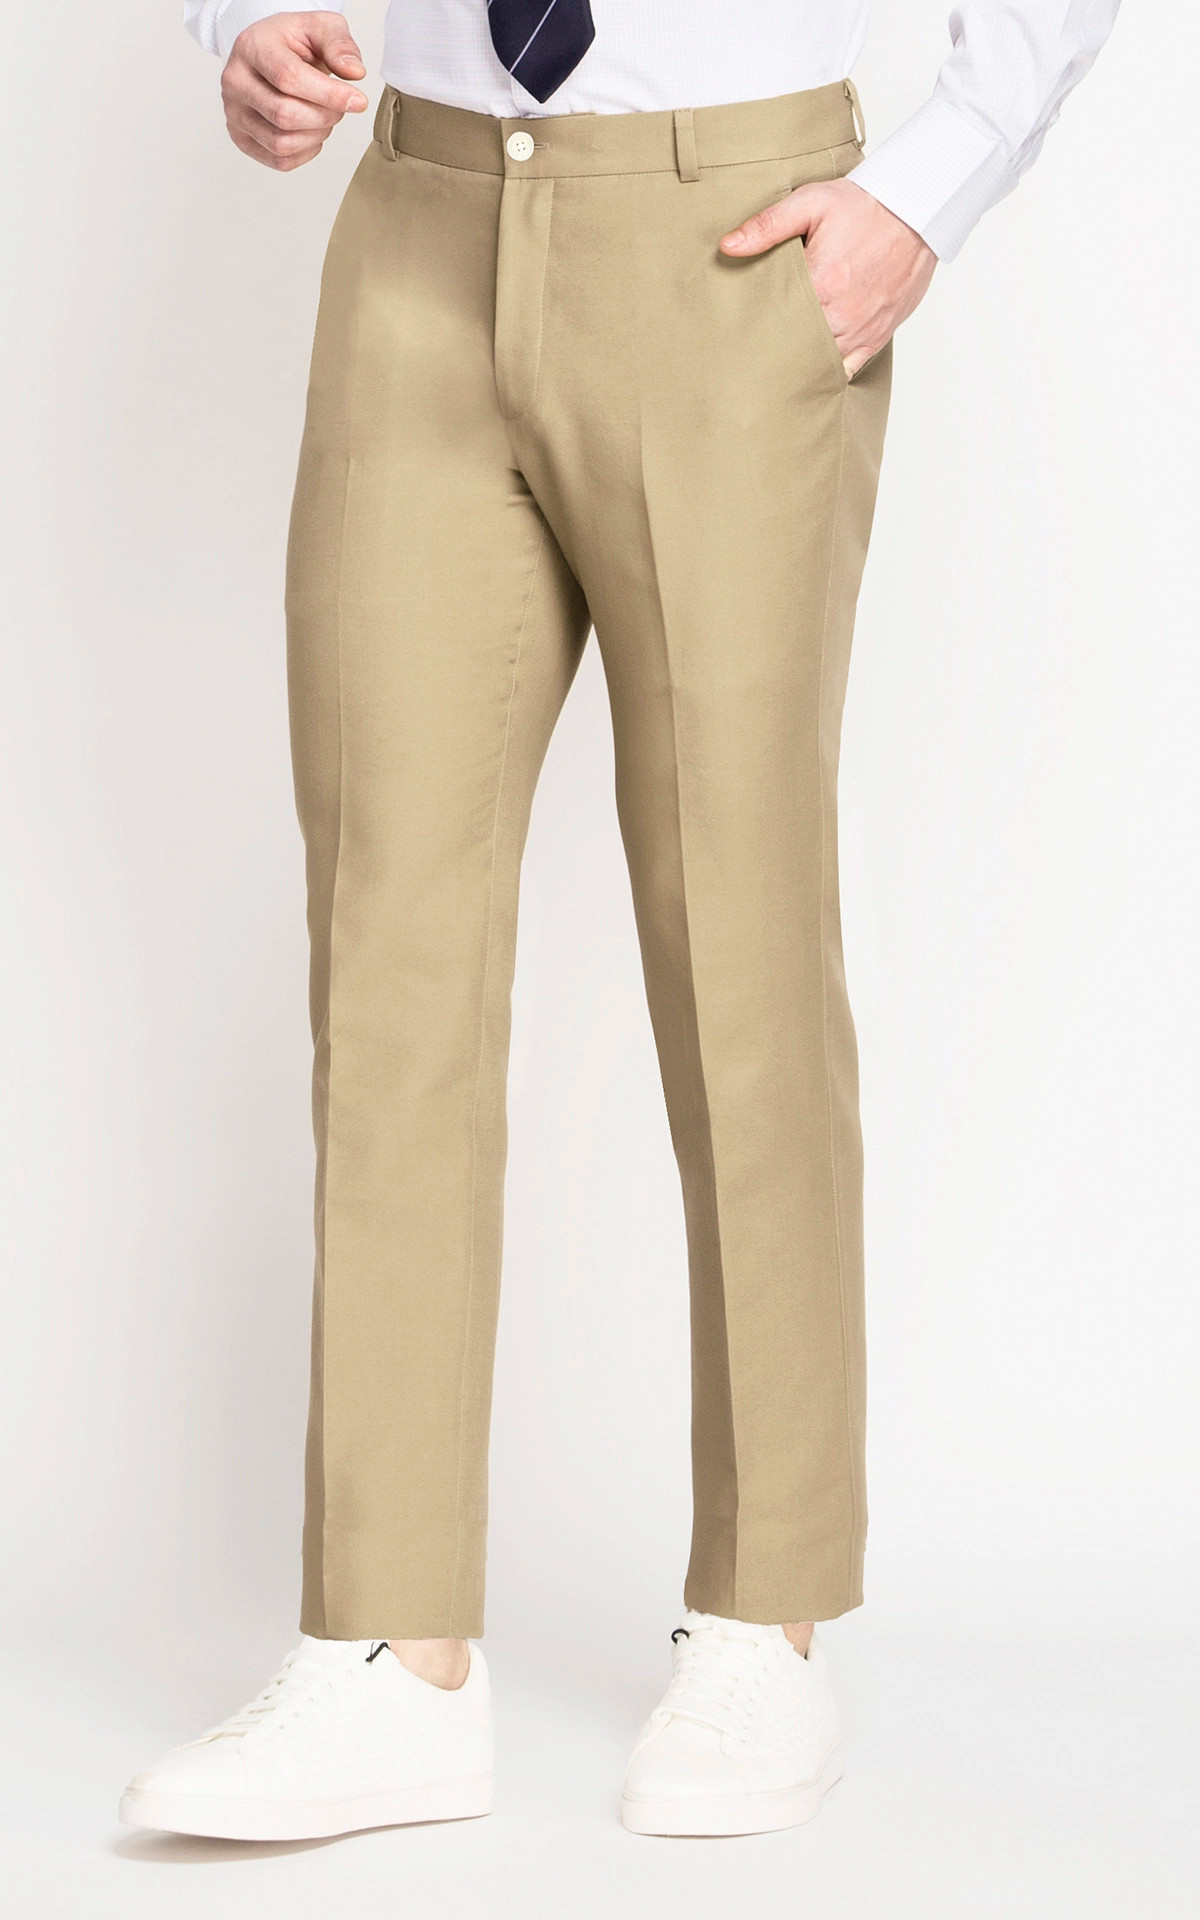 Buy Duke Cotton Solid Brown Trousers (Size : 30) at Amazon.in